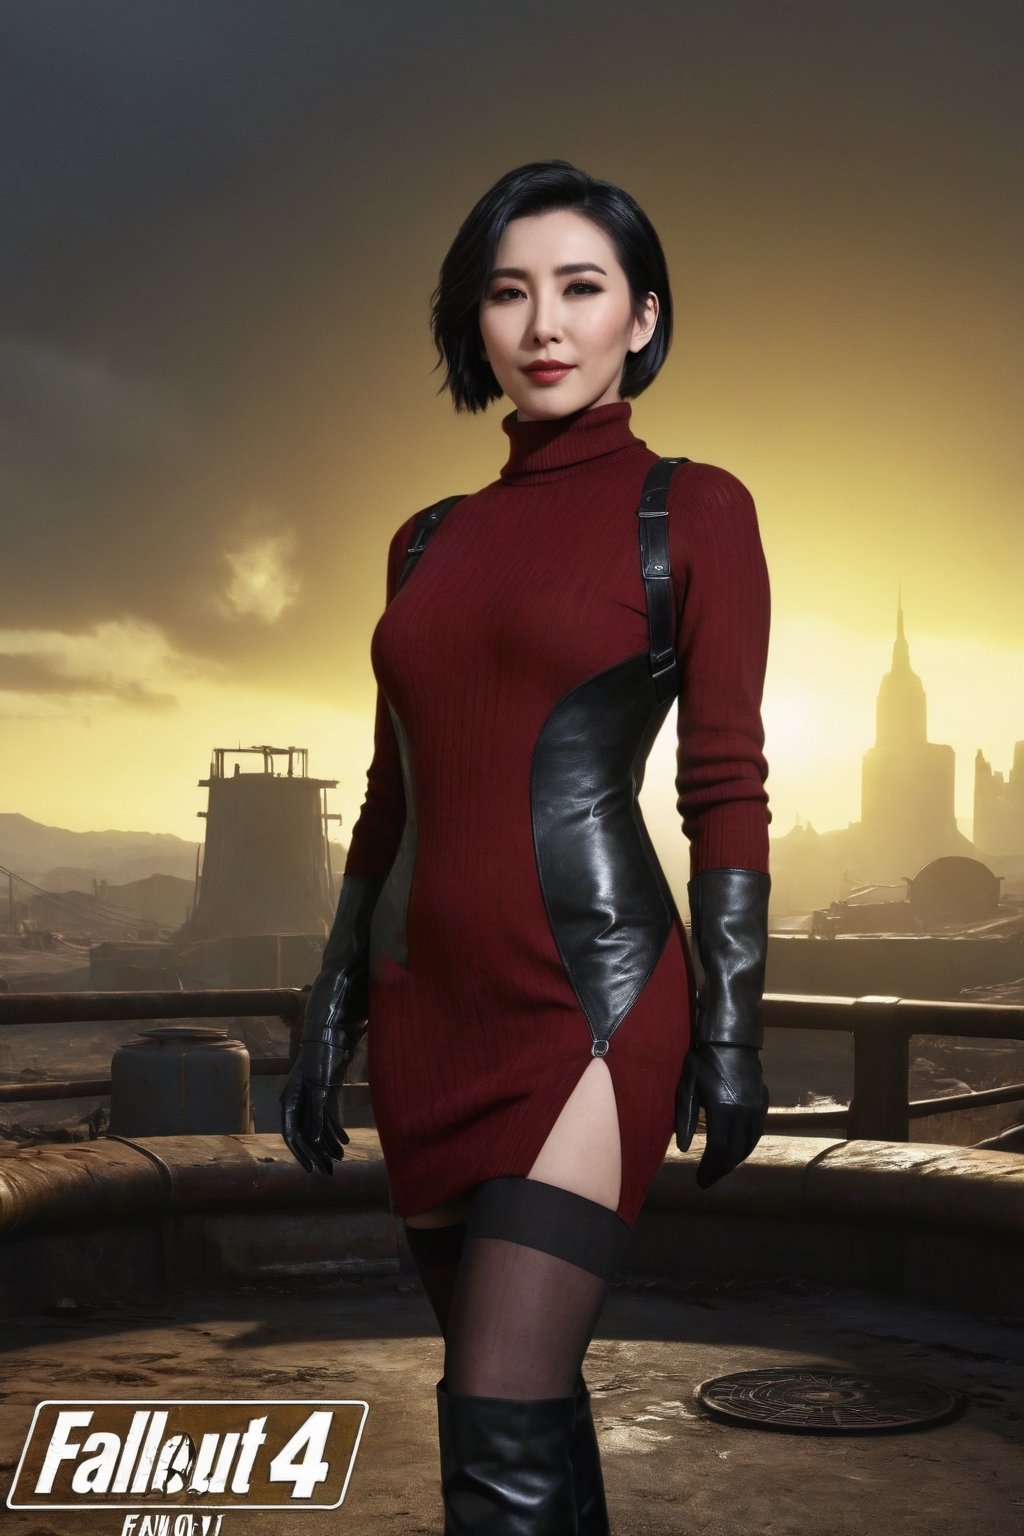 ((((Fallout_4_style)))), 24yo li bingbing, with BLACK asymmetrical blunt bobcut, (black eyeshadow), wearing (burgundy turtleneck sweater dress) with ((black_harness)), ((((black nylon pantyhose)))) under, (((long Black leather thighhigh boots))), in apocalyptic ((wastecity)), smirk, volumetric lighting, Render this image in 8K Extremely Realistic, Ensure the image is in 8K resolution, maintaining an 8K RAW photo level quality, treated as a masterpiece. ensuring the render is extremely realistic and detailed, following the high standards of SDXL. Enhance the realism and detail of the hands (Perfect hands:1.2), Fallout_4_logo